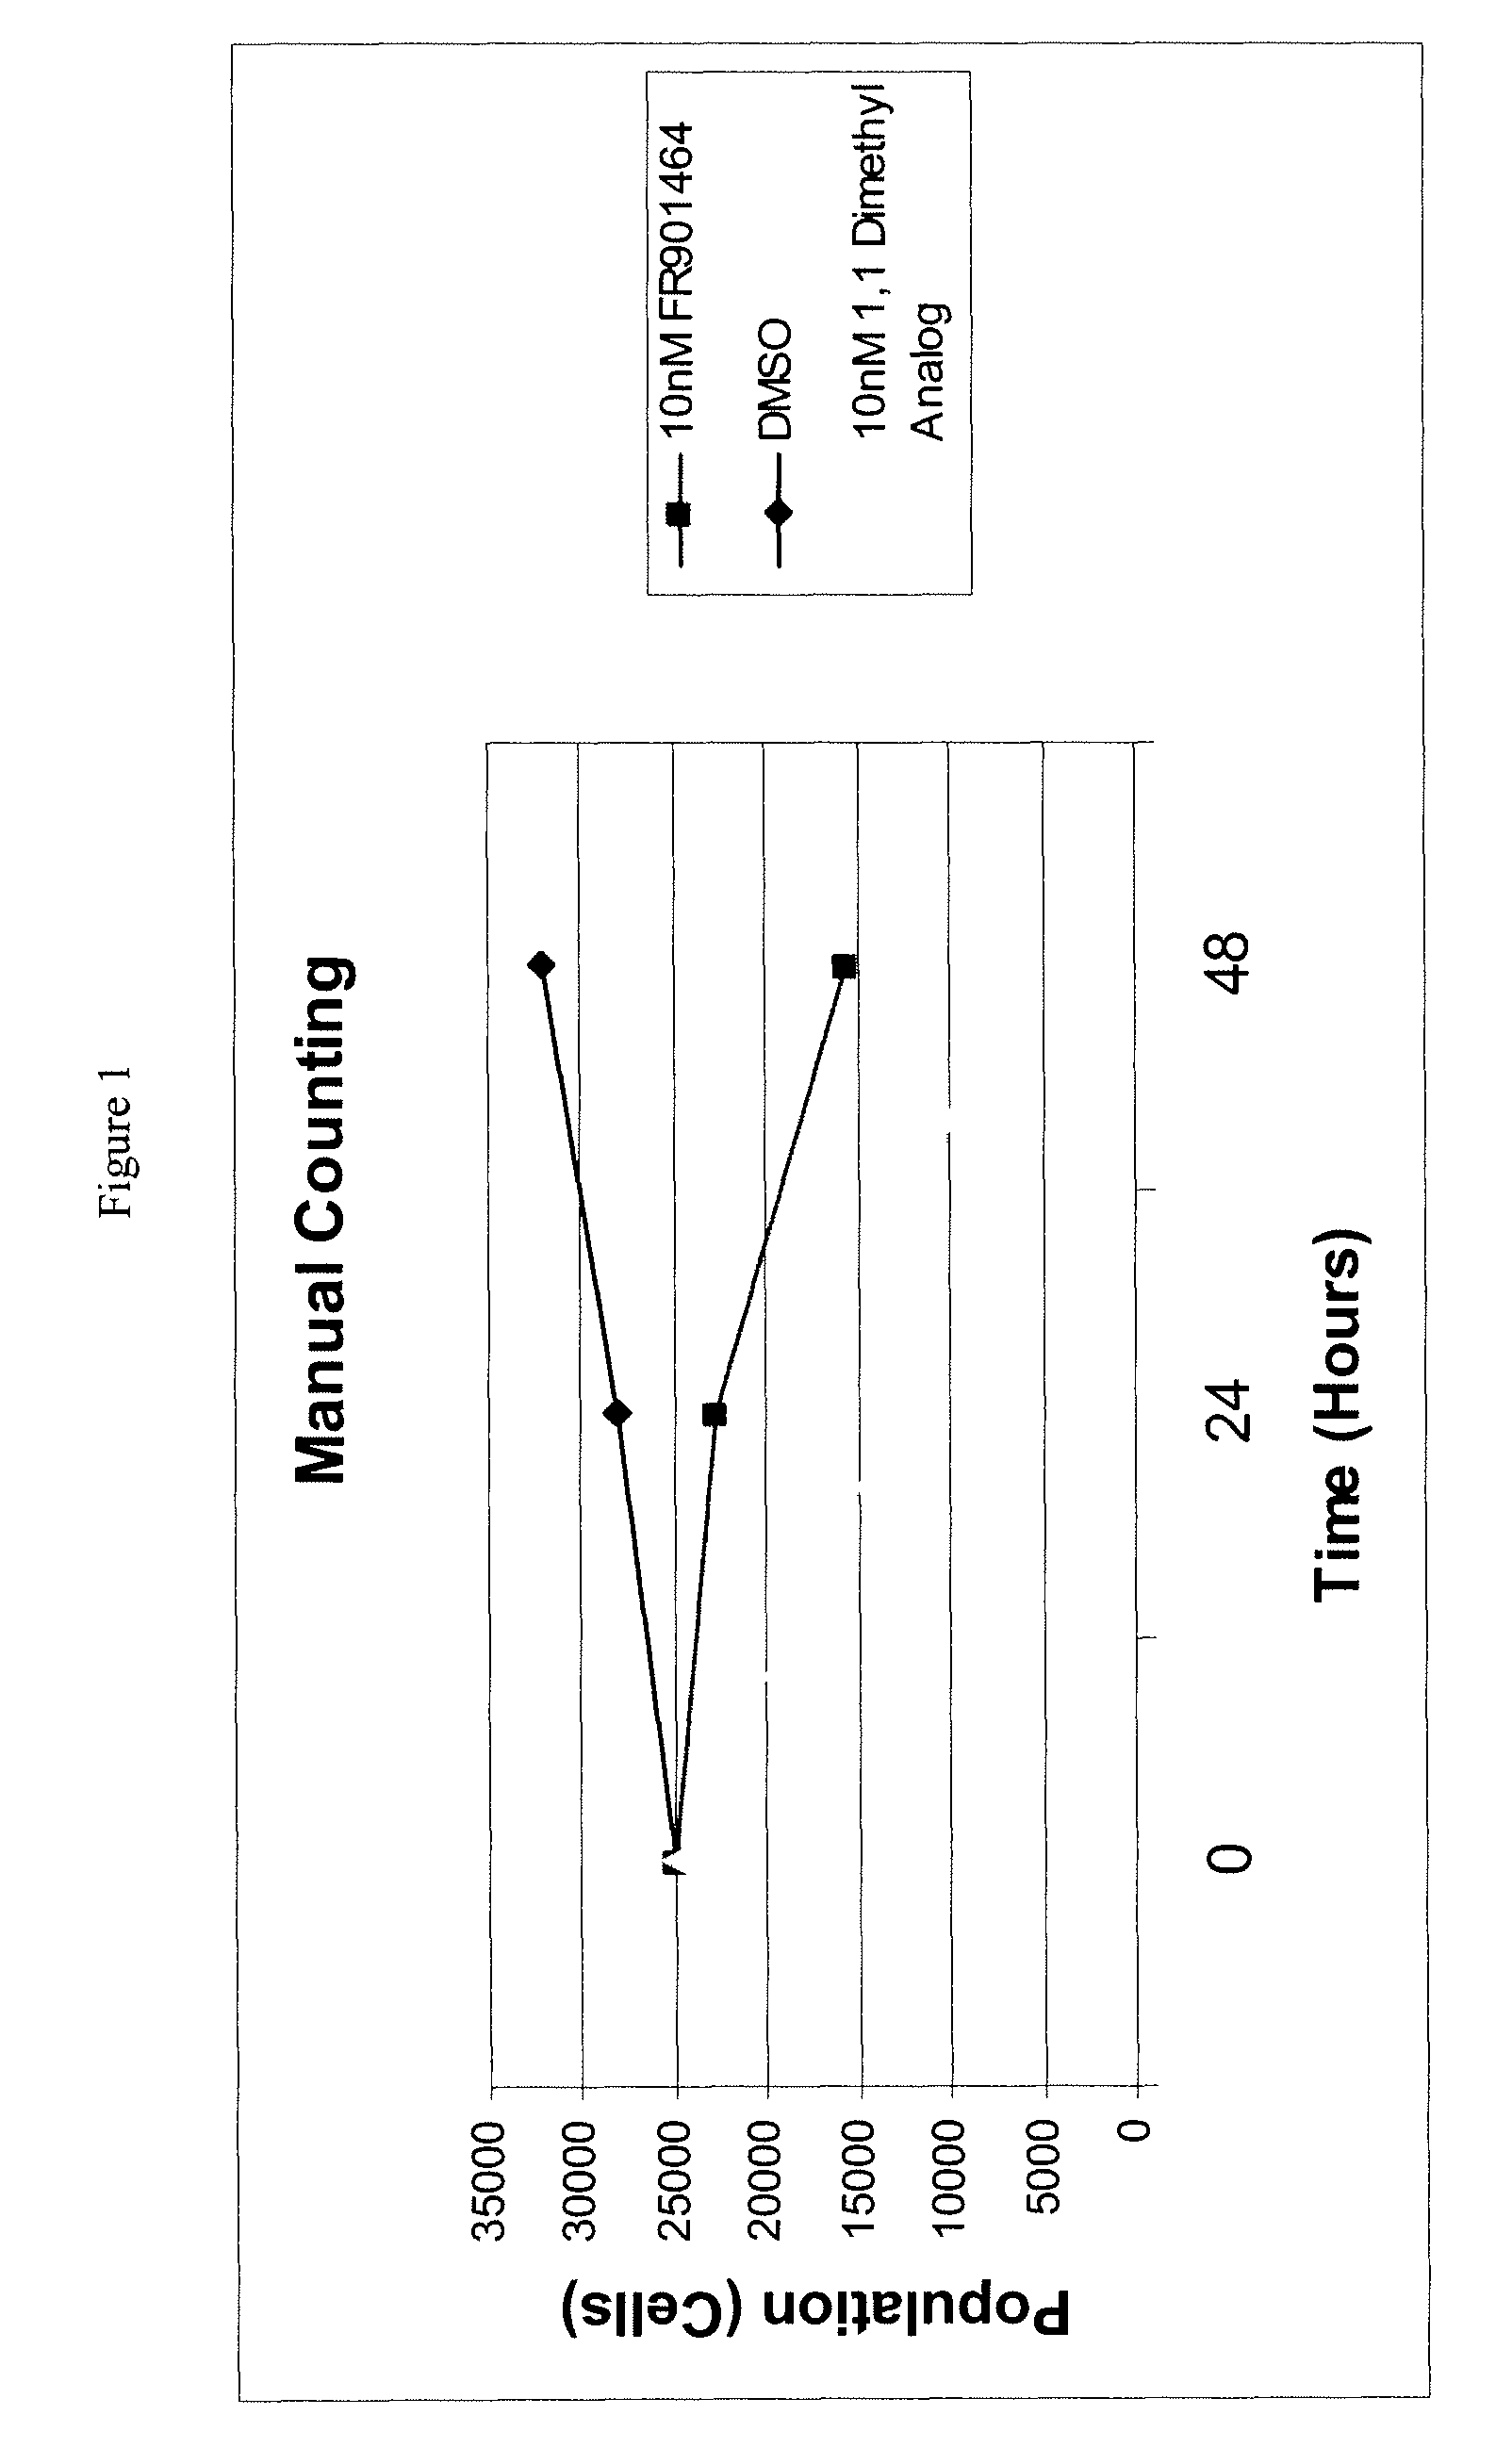 Synthesis of FR901464 and analogs with antitumor activity